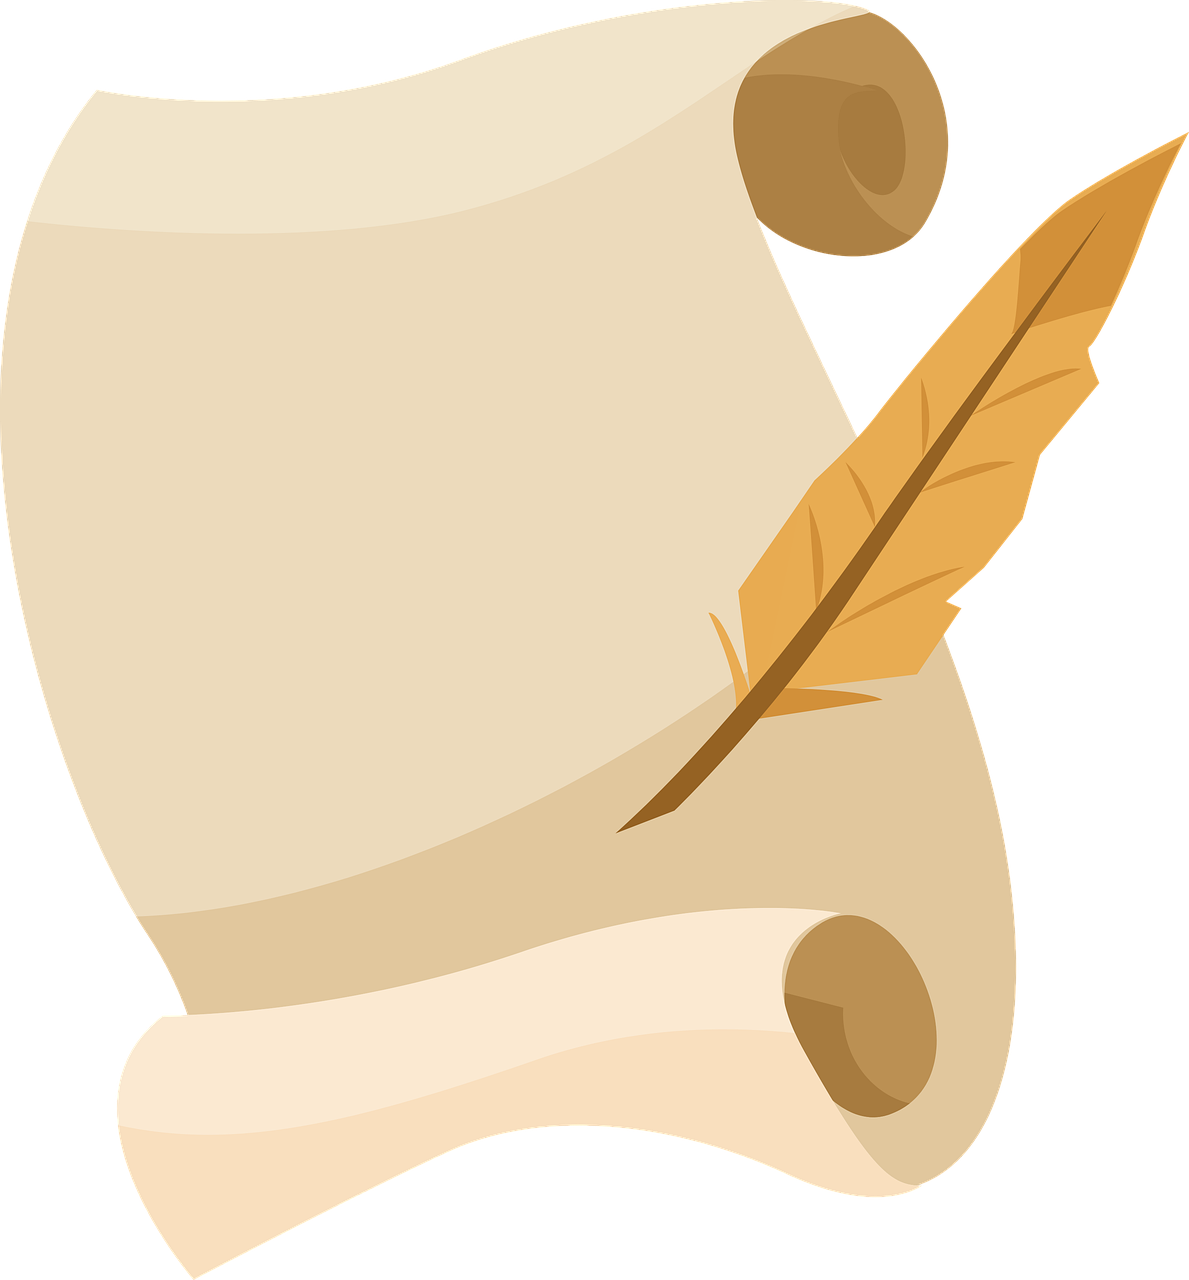 a scroll with a feather resting on top of it, an illustration of, conceptual art, whole page illustration, blank, simple primitive tube shape, da vinci notes